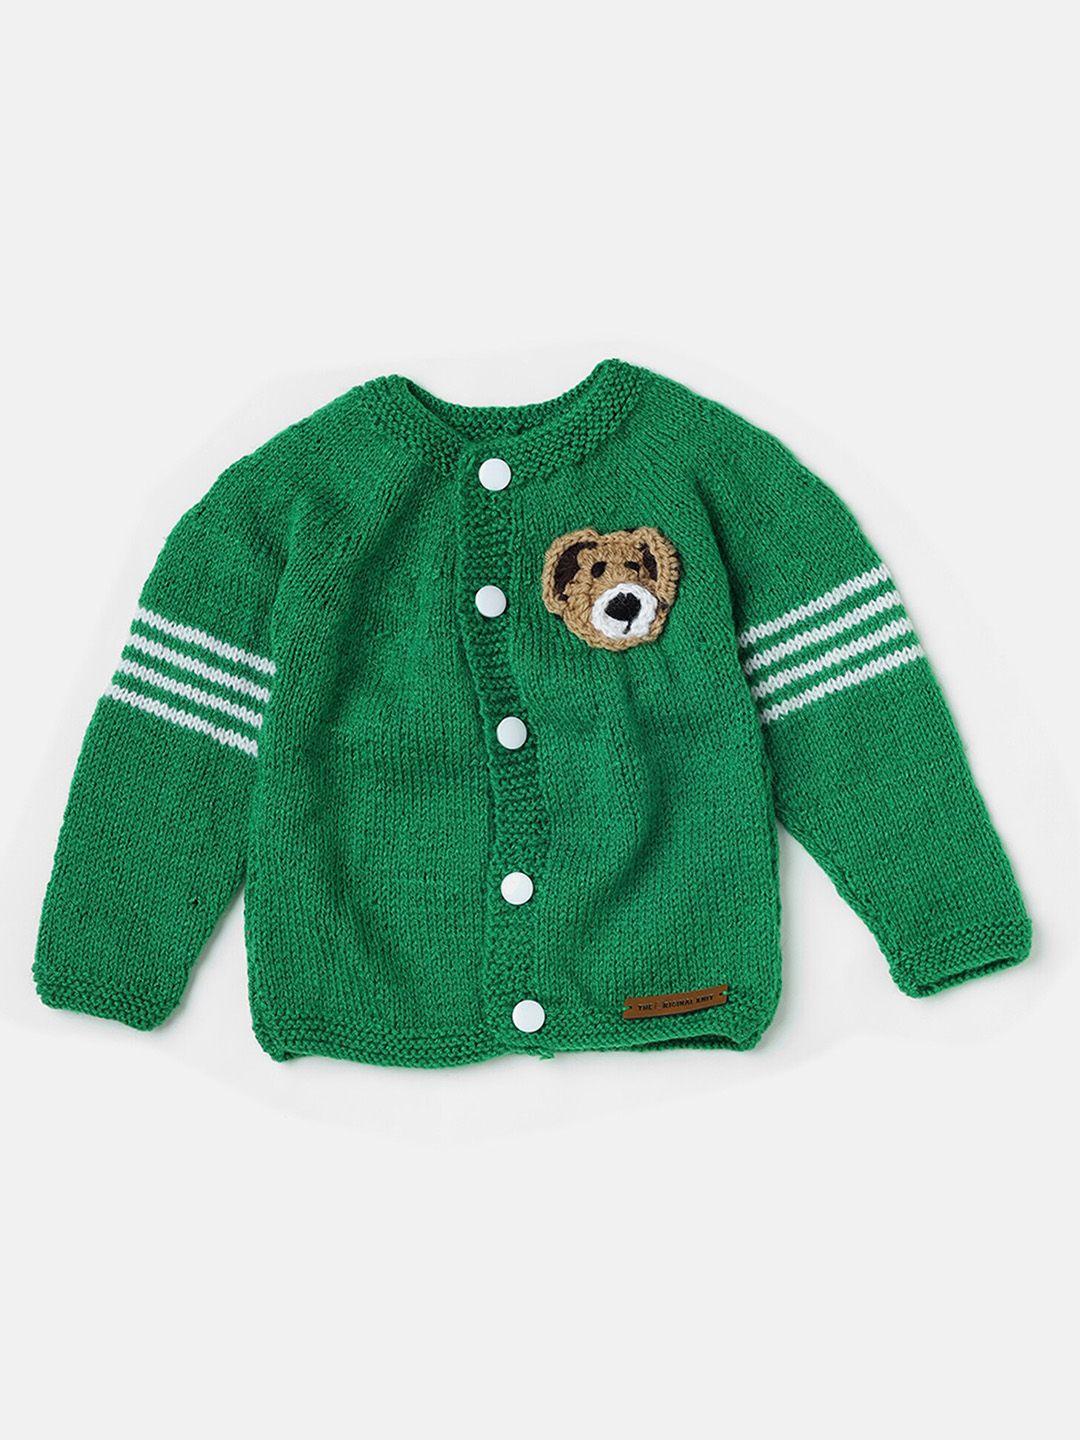 the original knit unisex kids green & white striped cardigan with applique detail